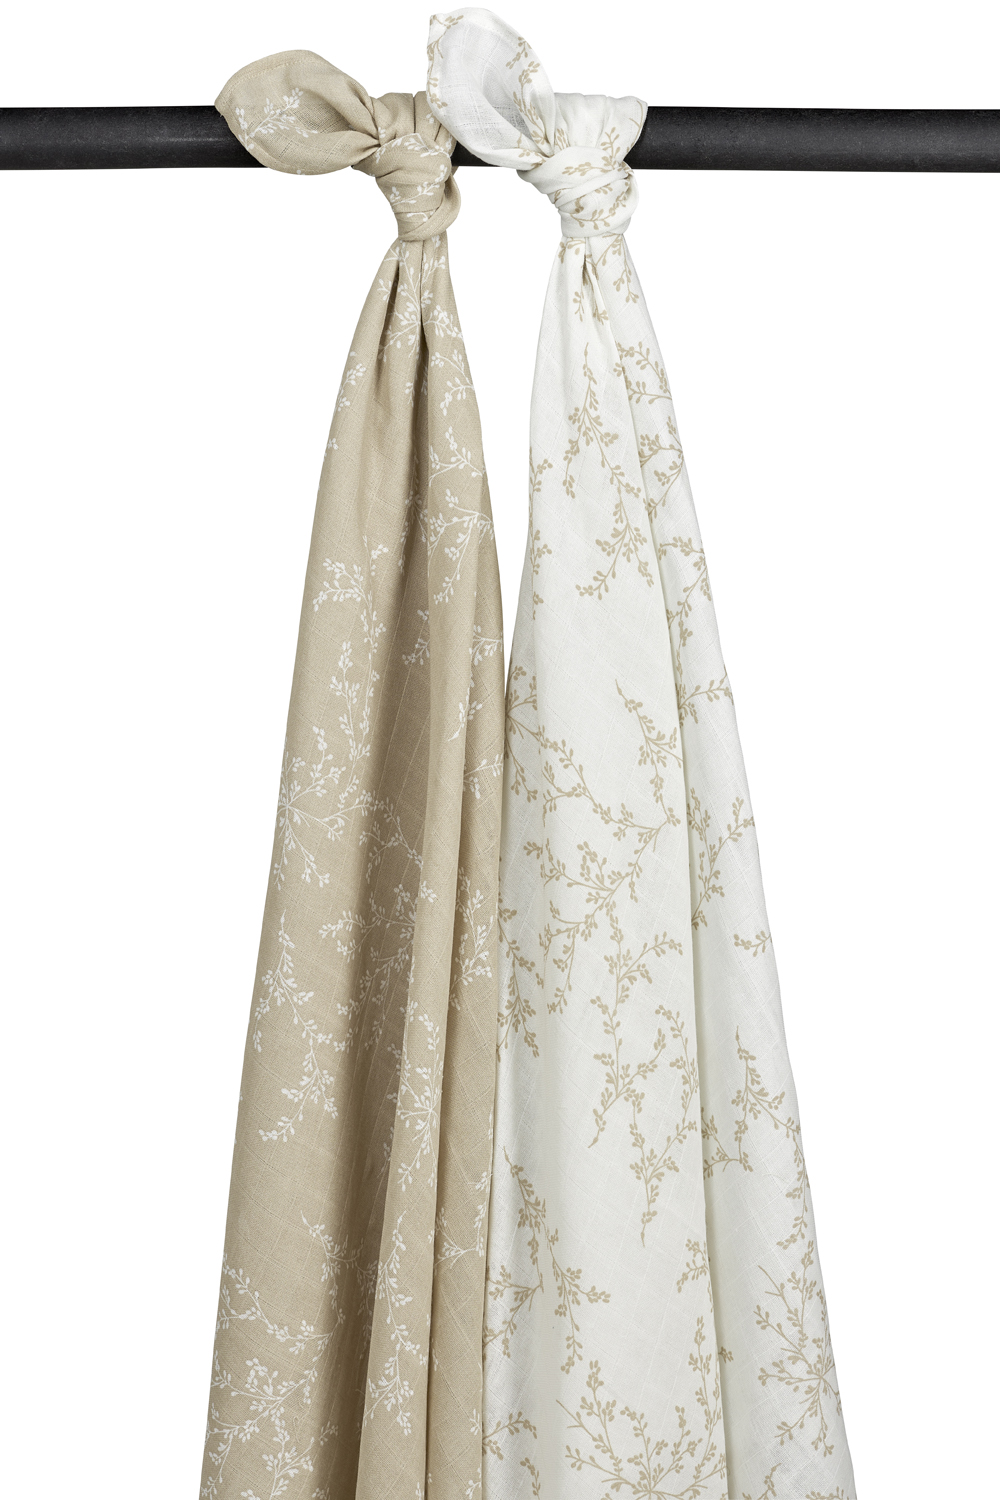 Musselin Swaddles 2-pack Branches - Sand - 120x120cm